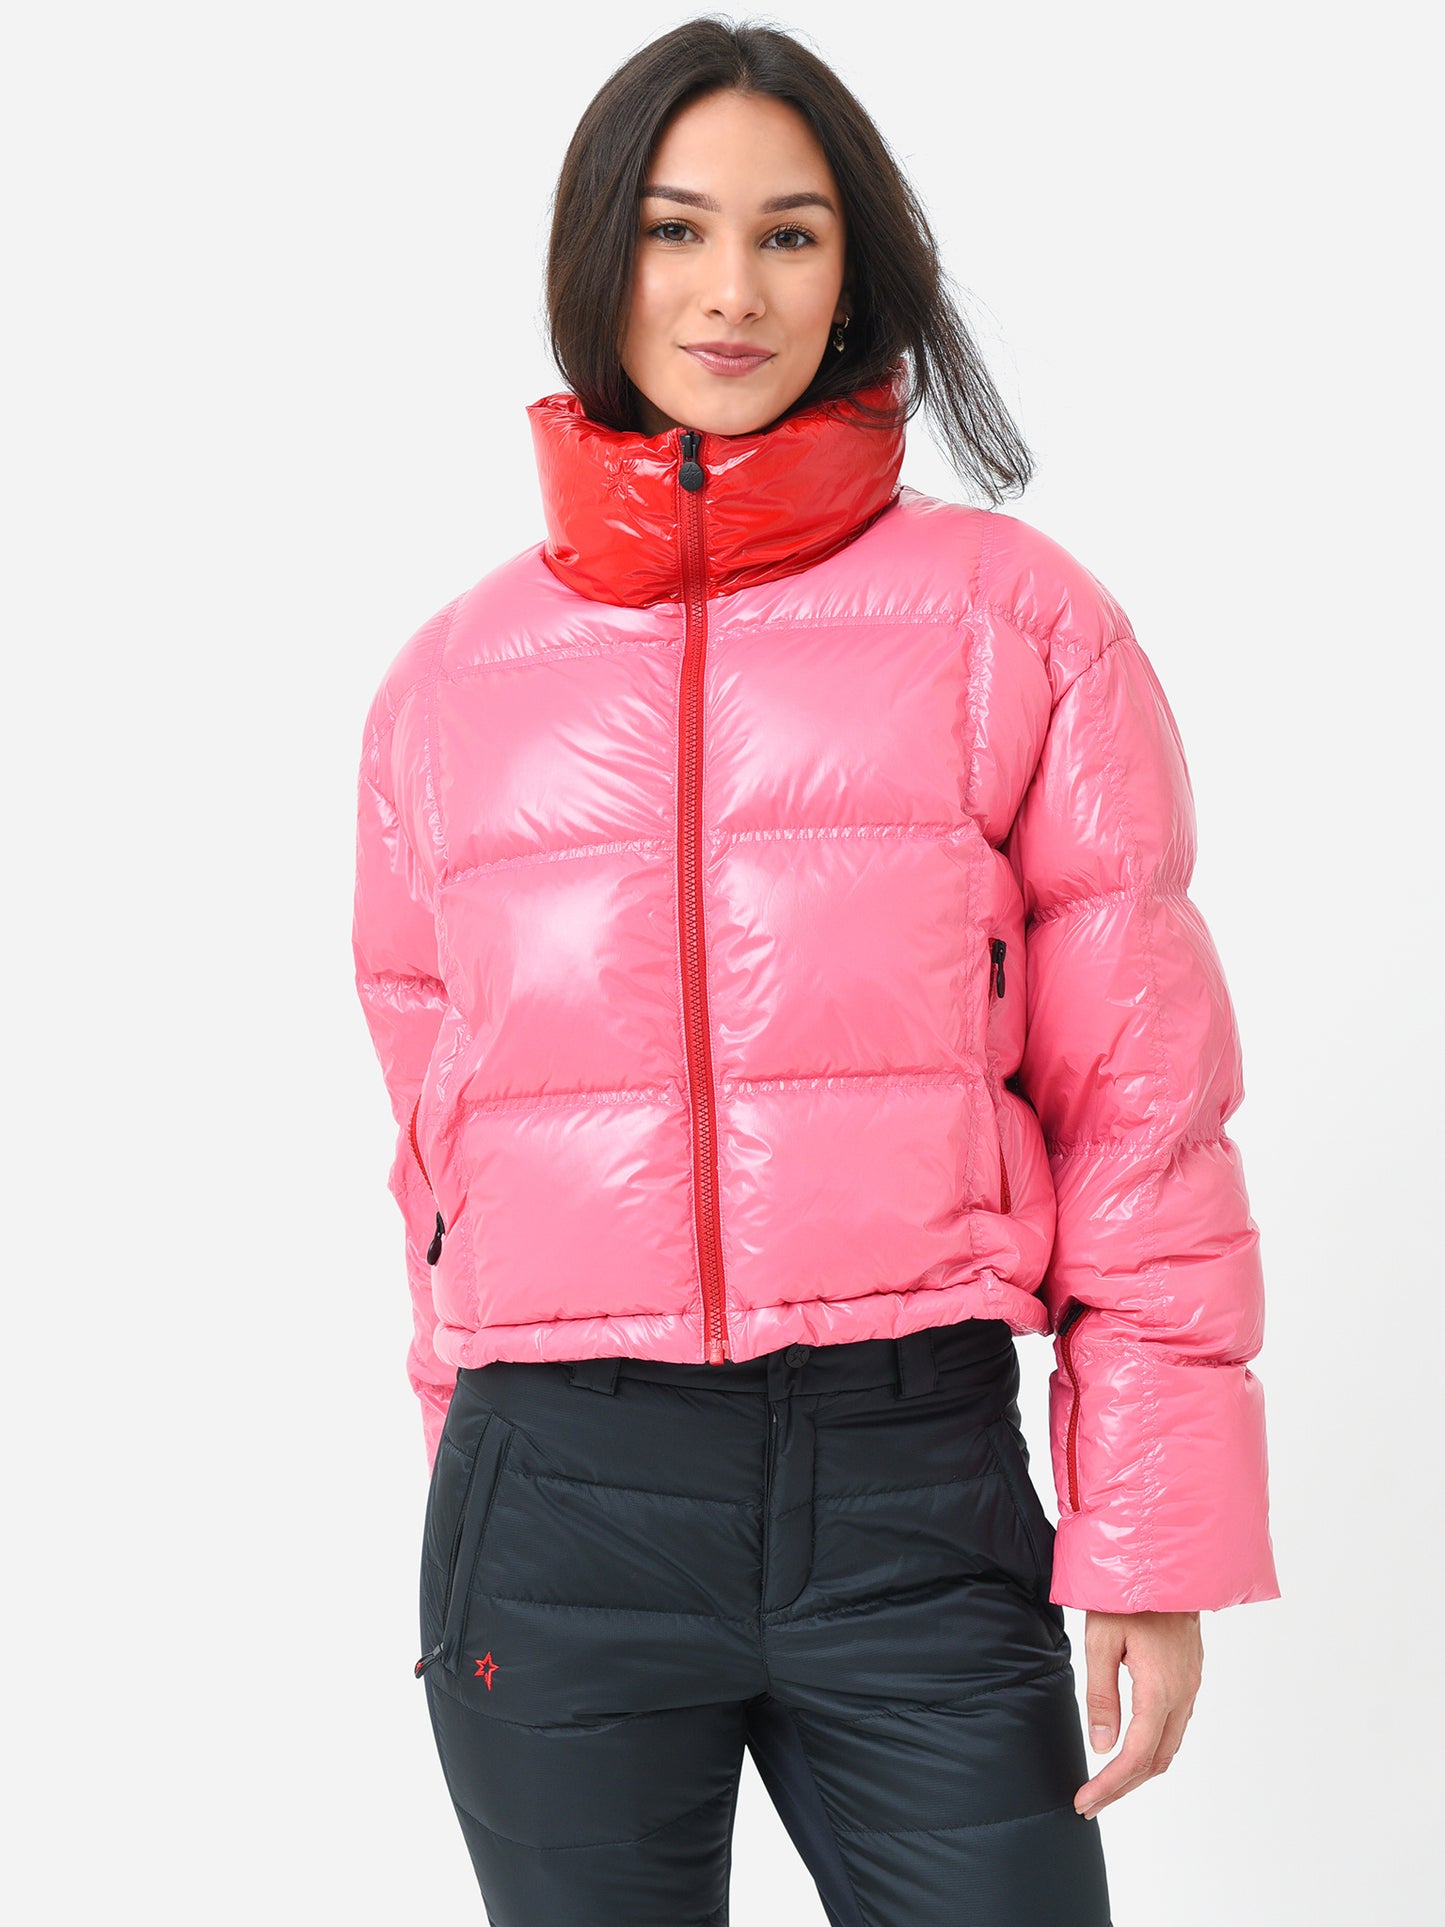 Perfect Moment Women's Nevada Down Jacket